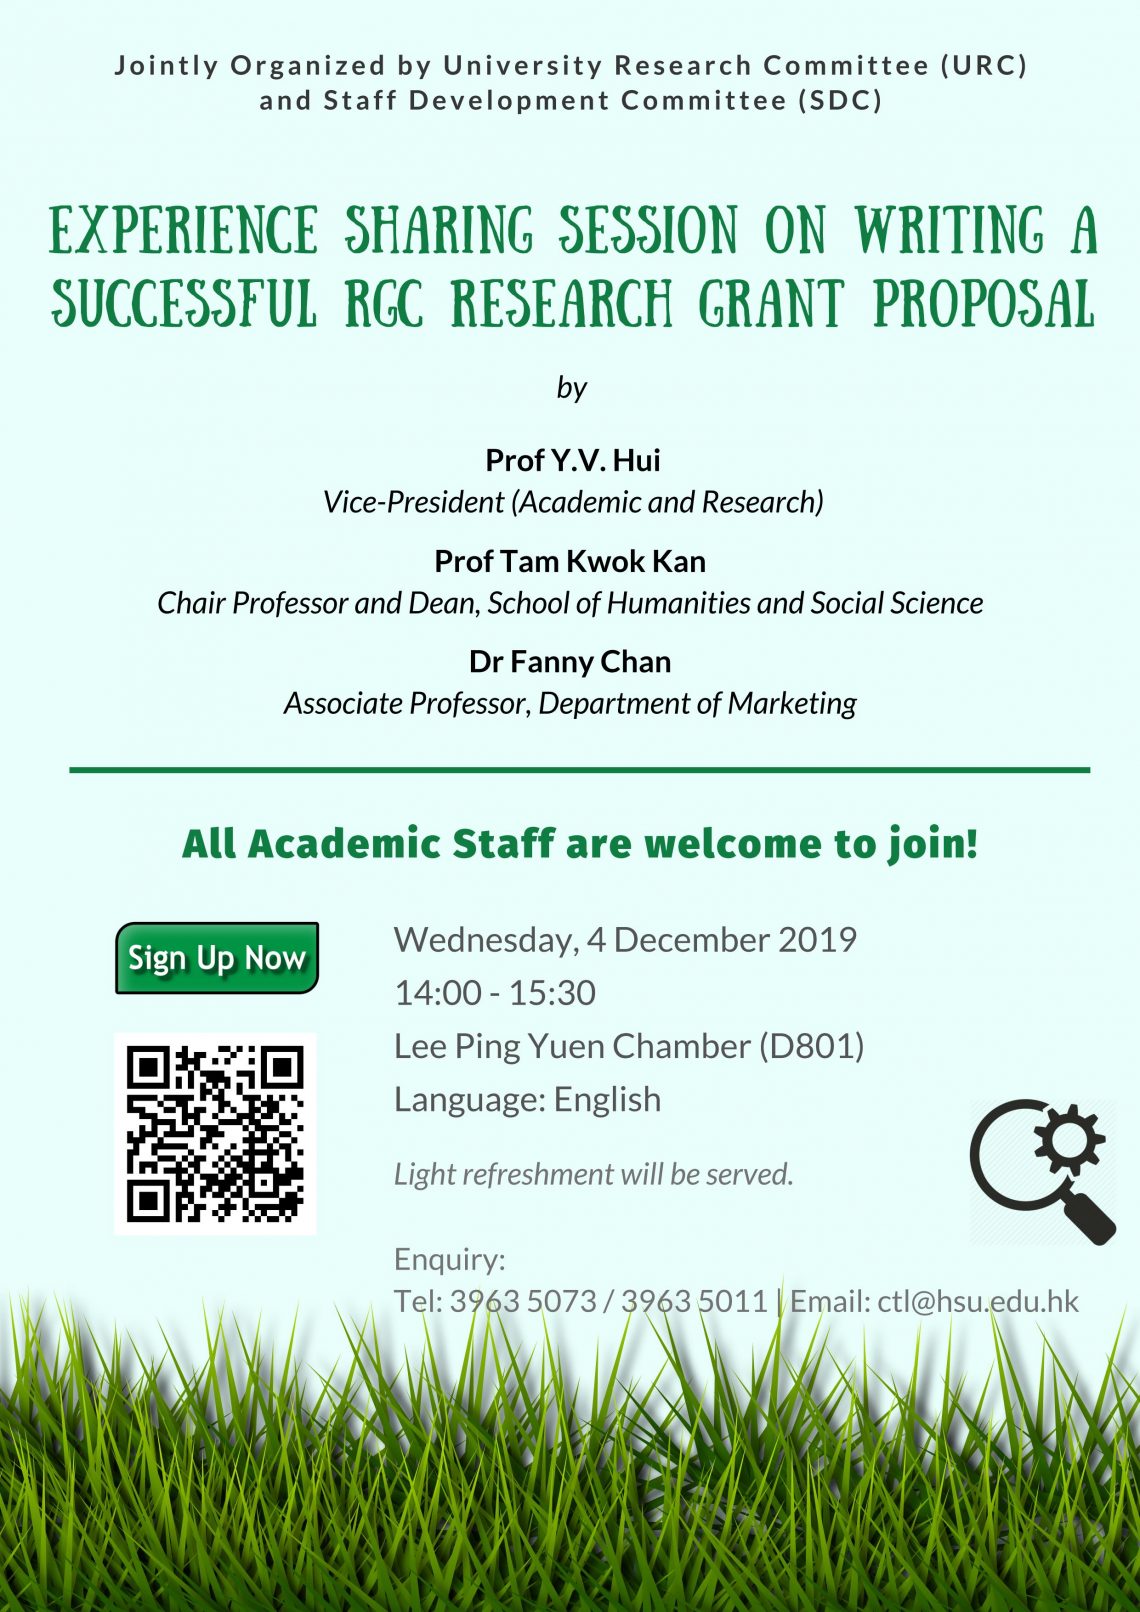 Experience Sharing Session on Writing a Successful RGC Research Grant Proposal